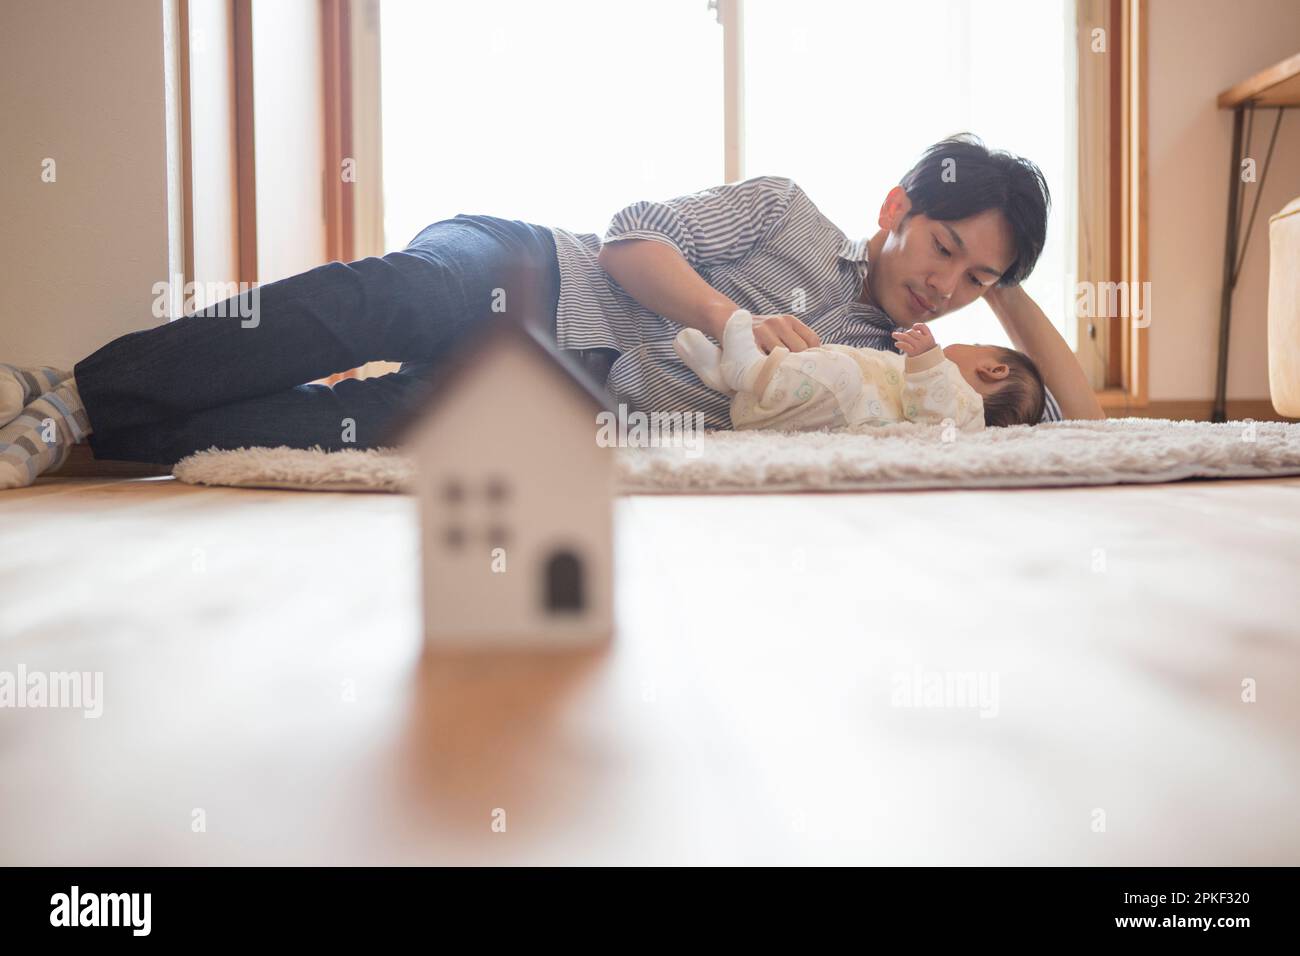 Model of a house with a father taking care of a child Stock Photo